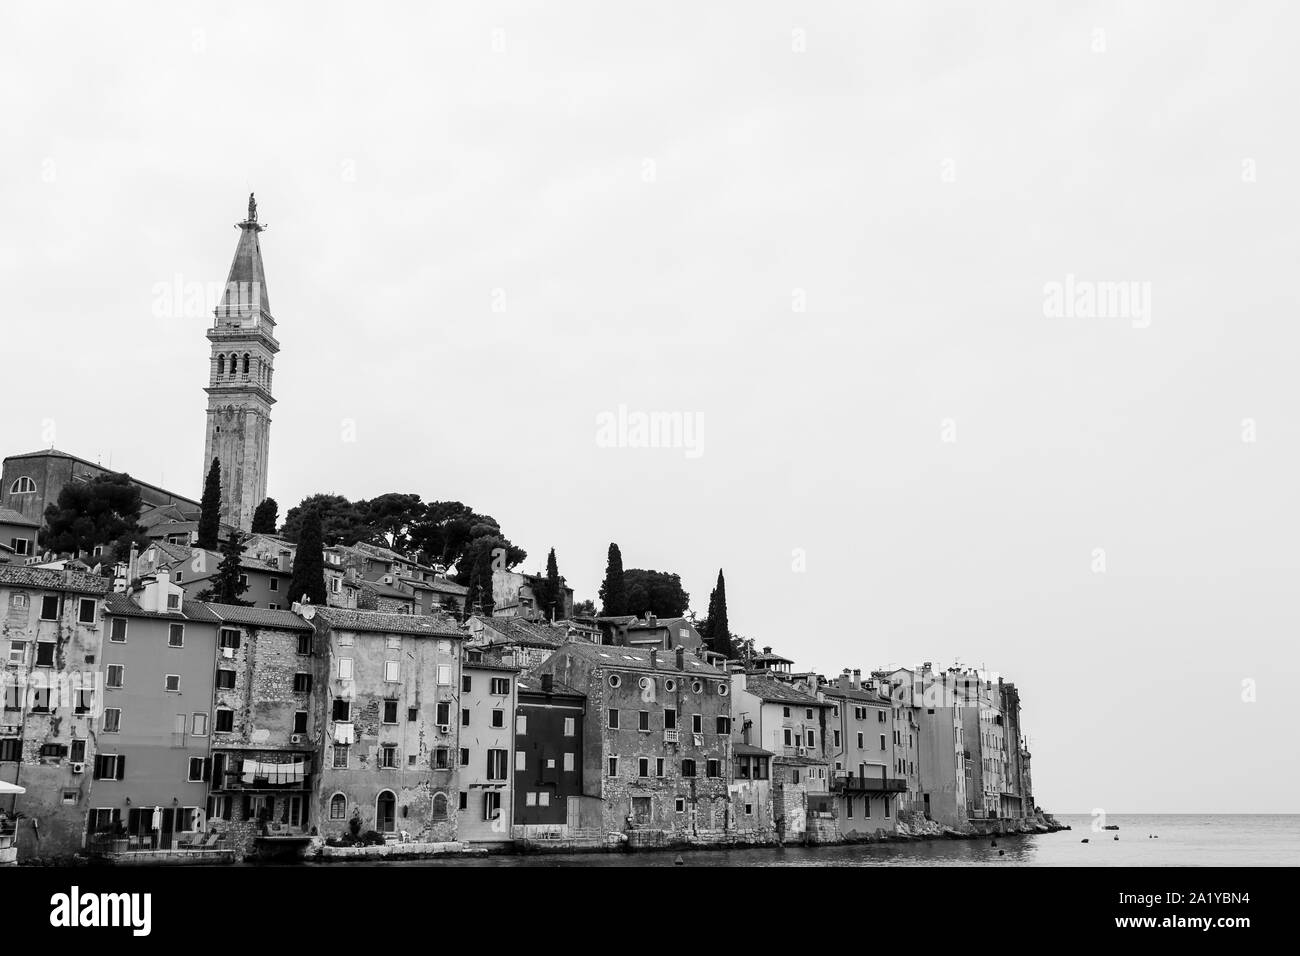 The old town of Rovinj on a hilly peninsula, surrounded by the Adriatic Sea in Croatia. Stock Photo